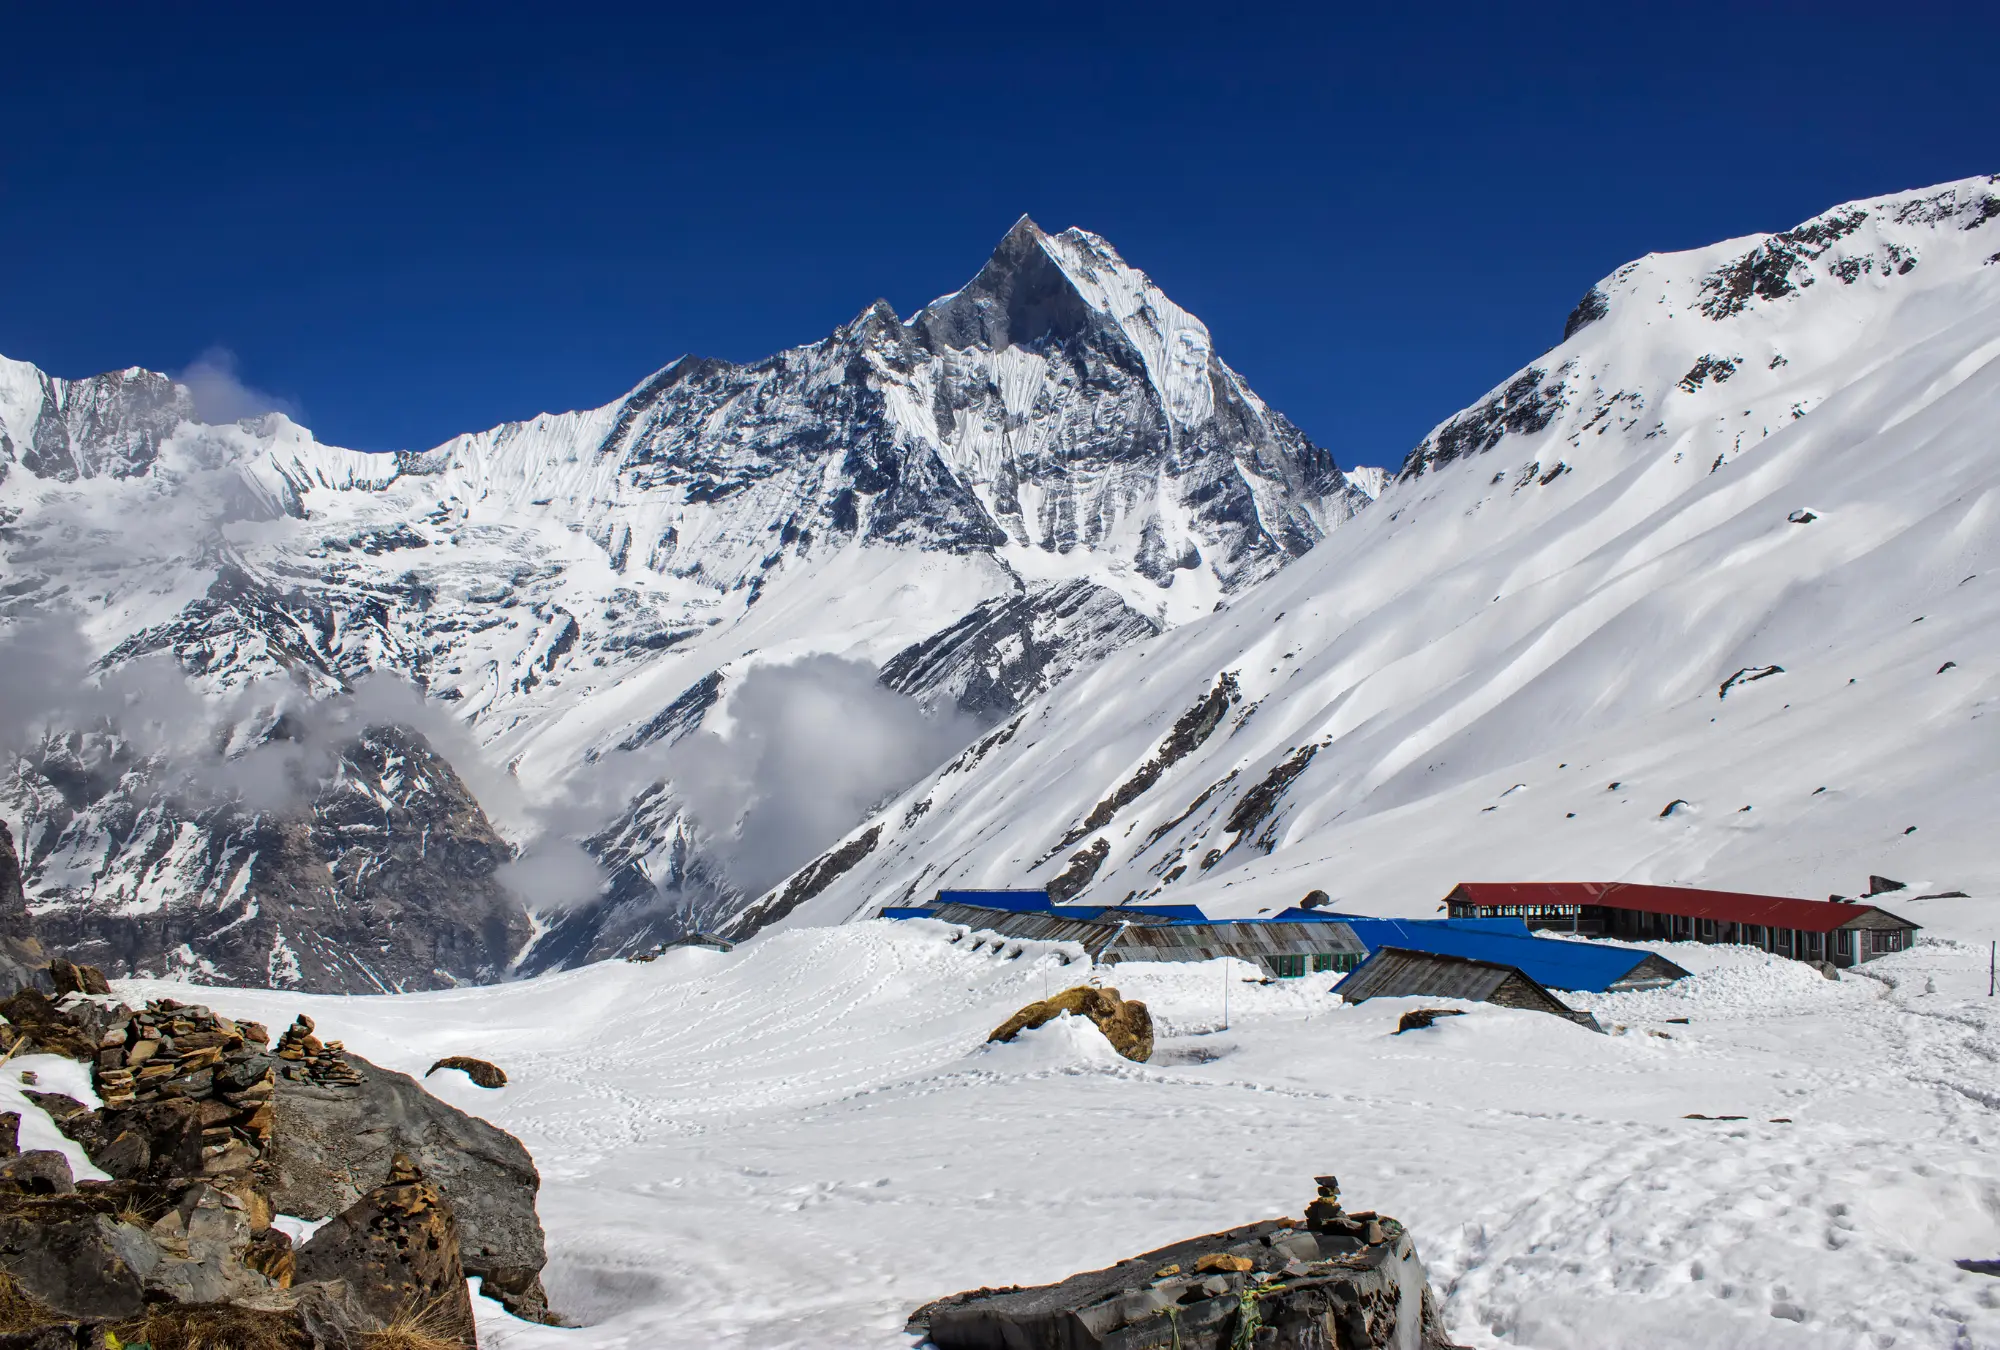 Annapurna Base Camp in Nepal - By Mountain People